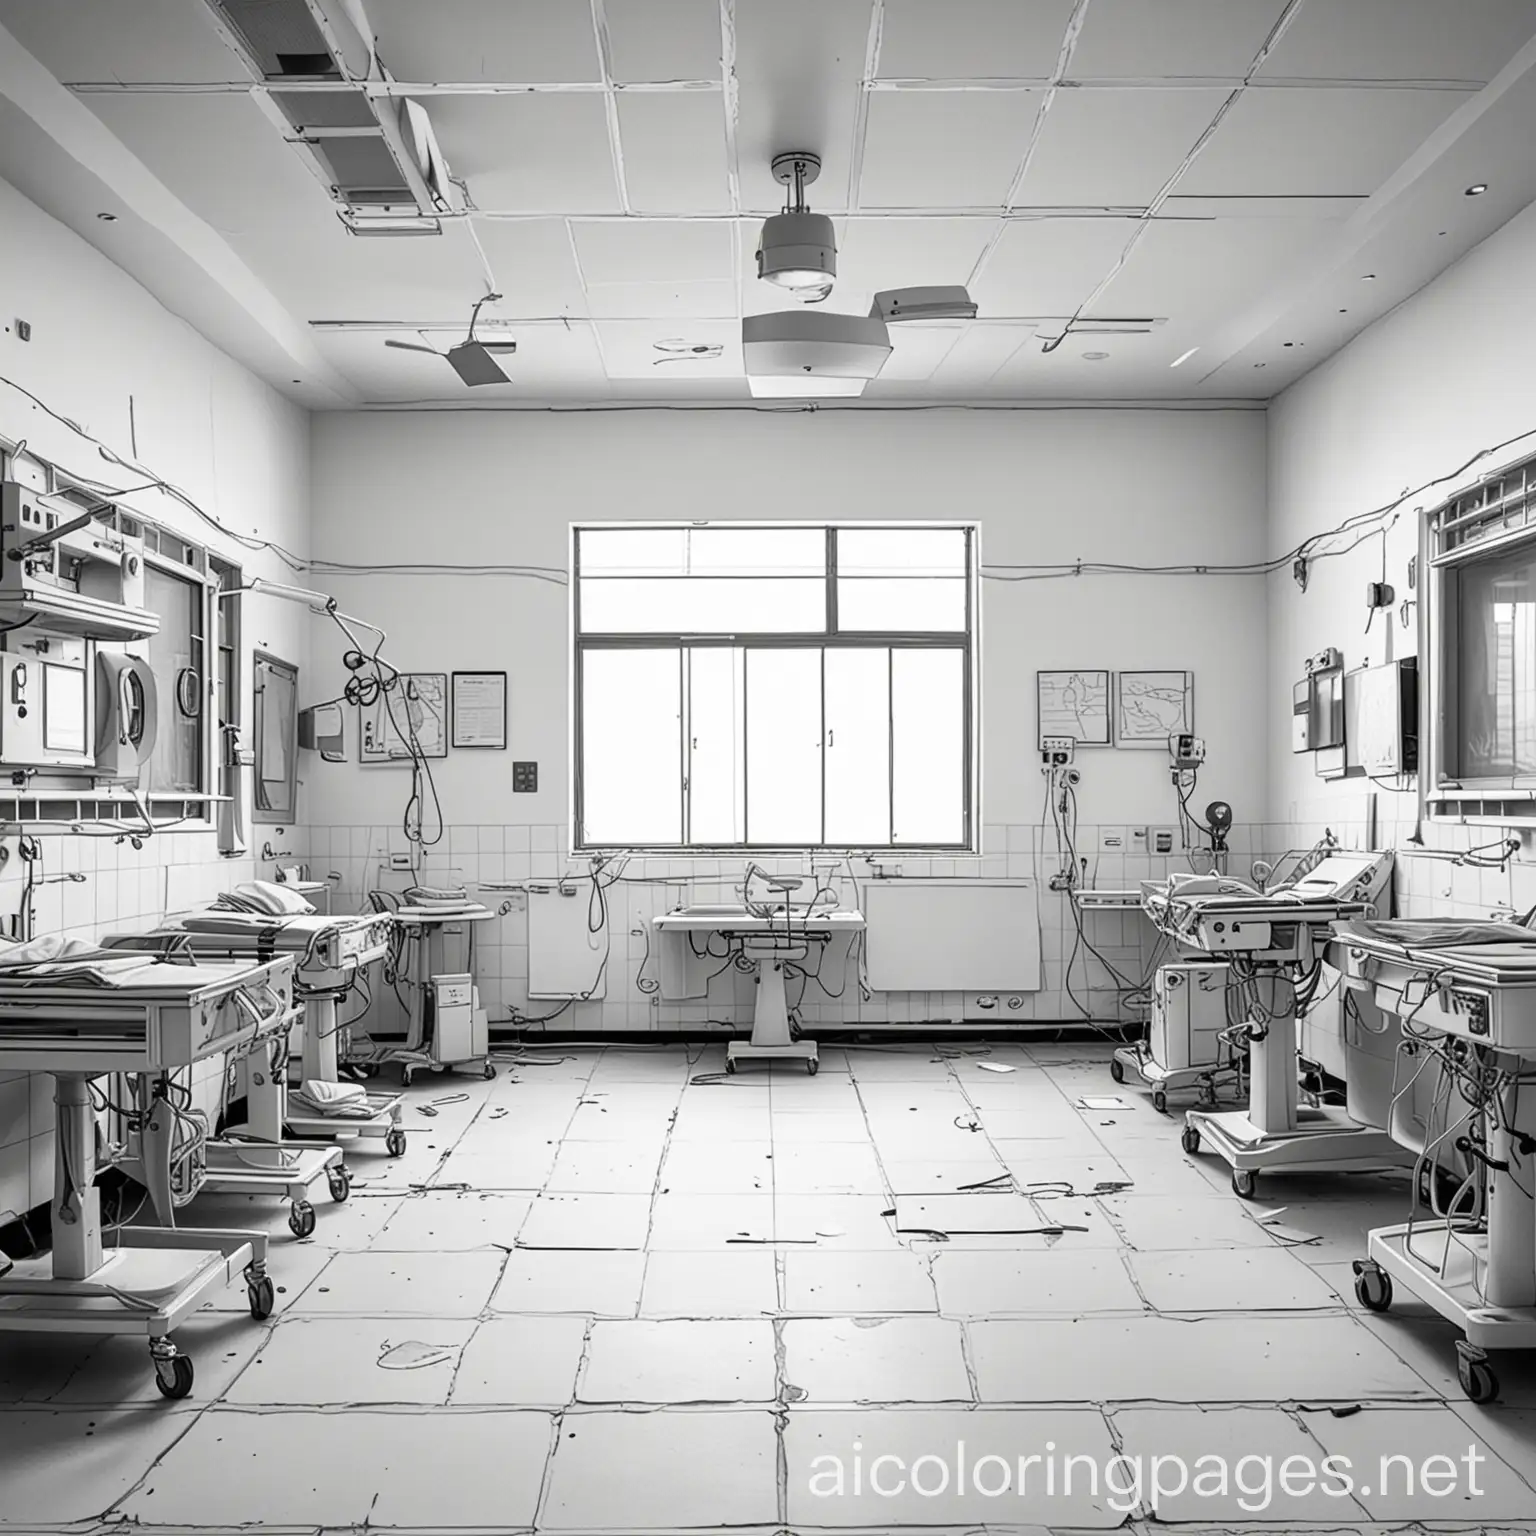 abandoned hospital operating room, Coloring Page, black and white, line art, white background, Simplicity, Ample White Space. The background of the coloring page is plain white to make it easy for young children to color within the lines. The outlines of all the subjects are easy to distinguish, making it simple for kids to color without too much difficulty